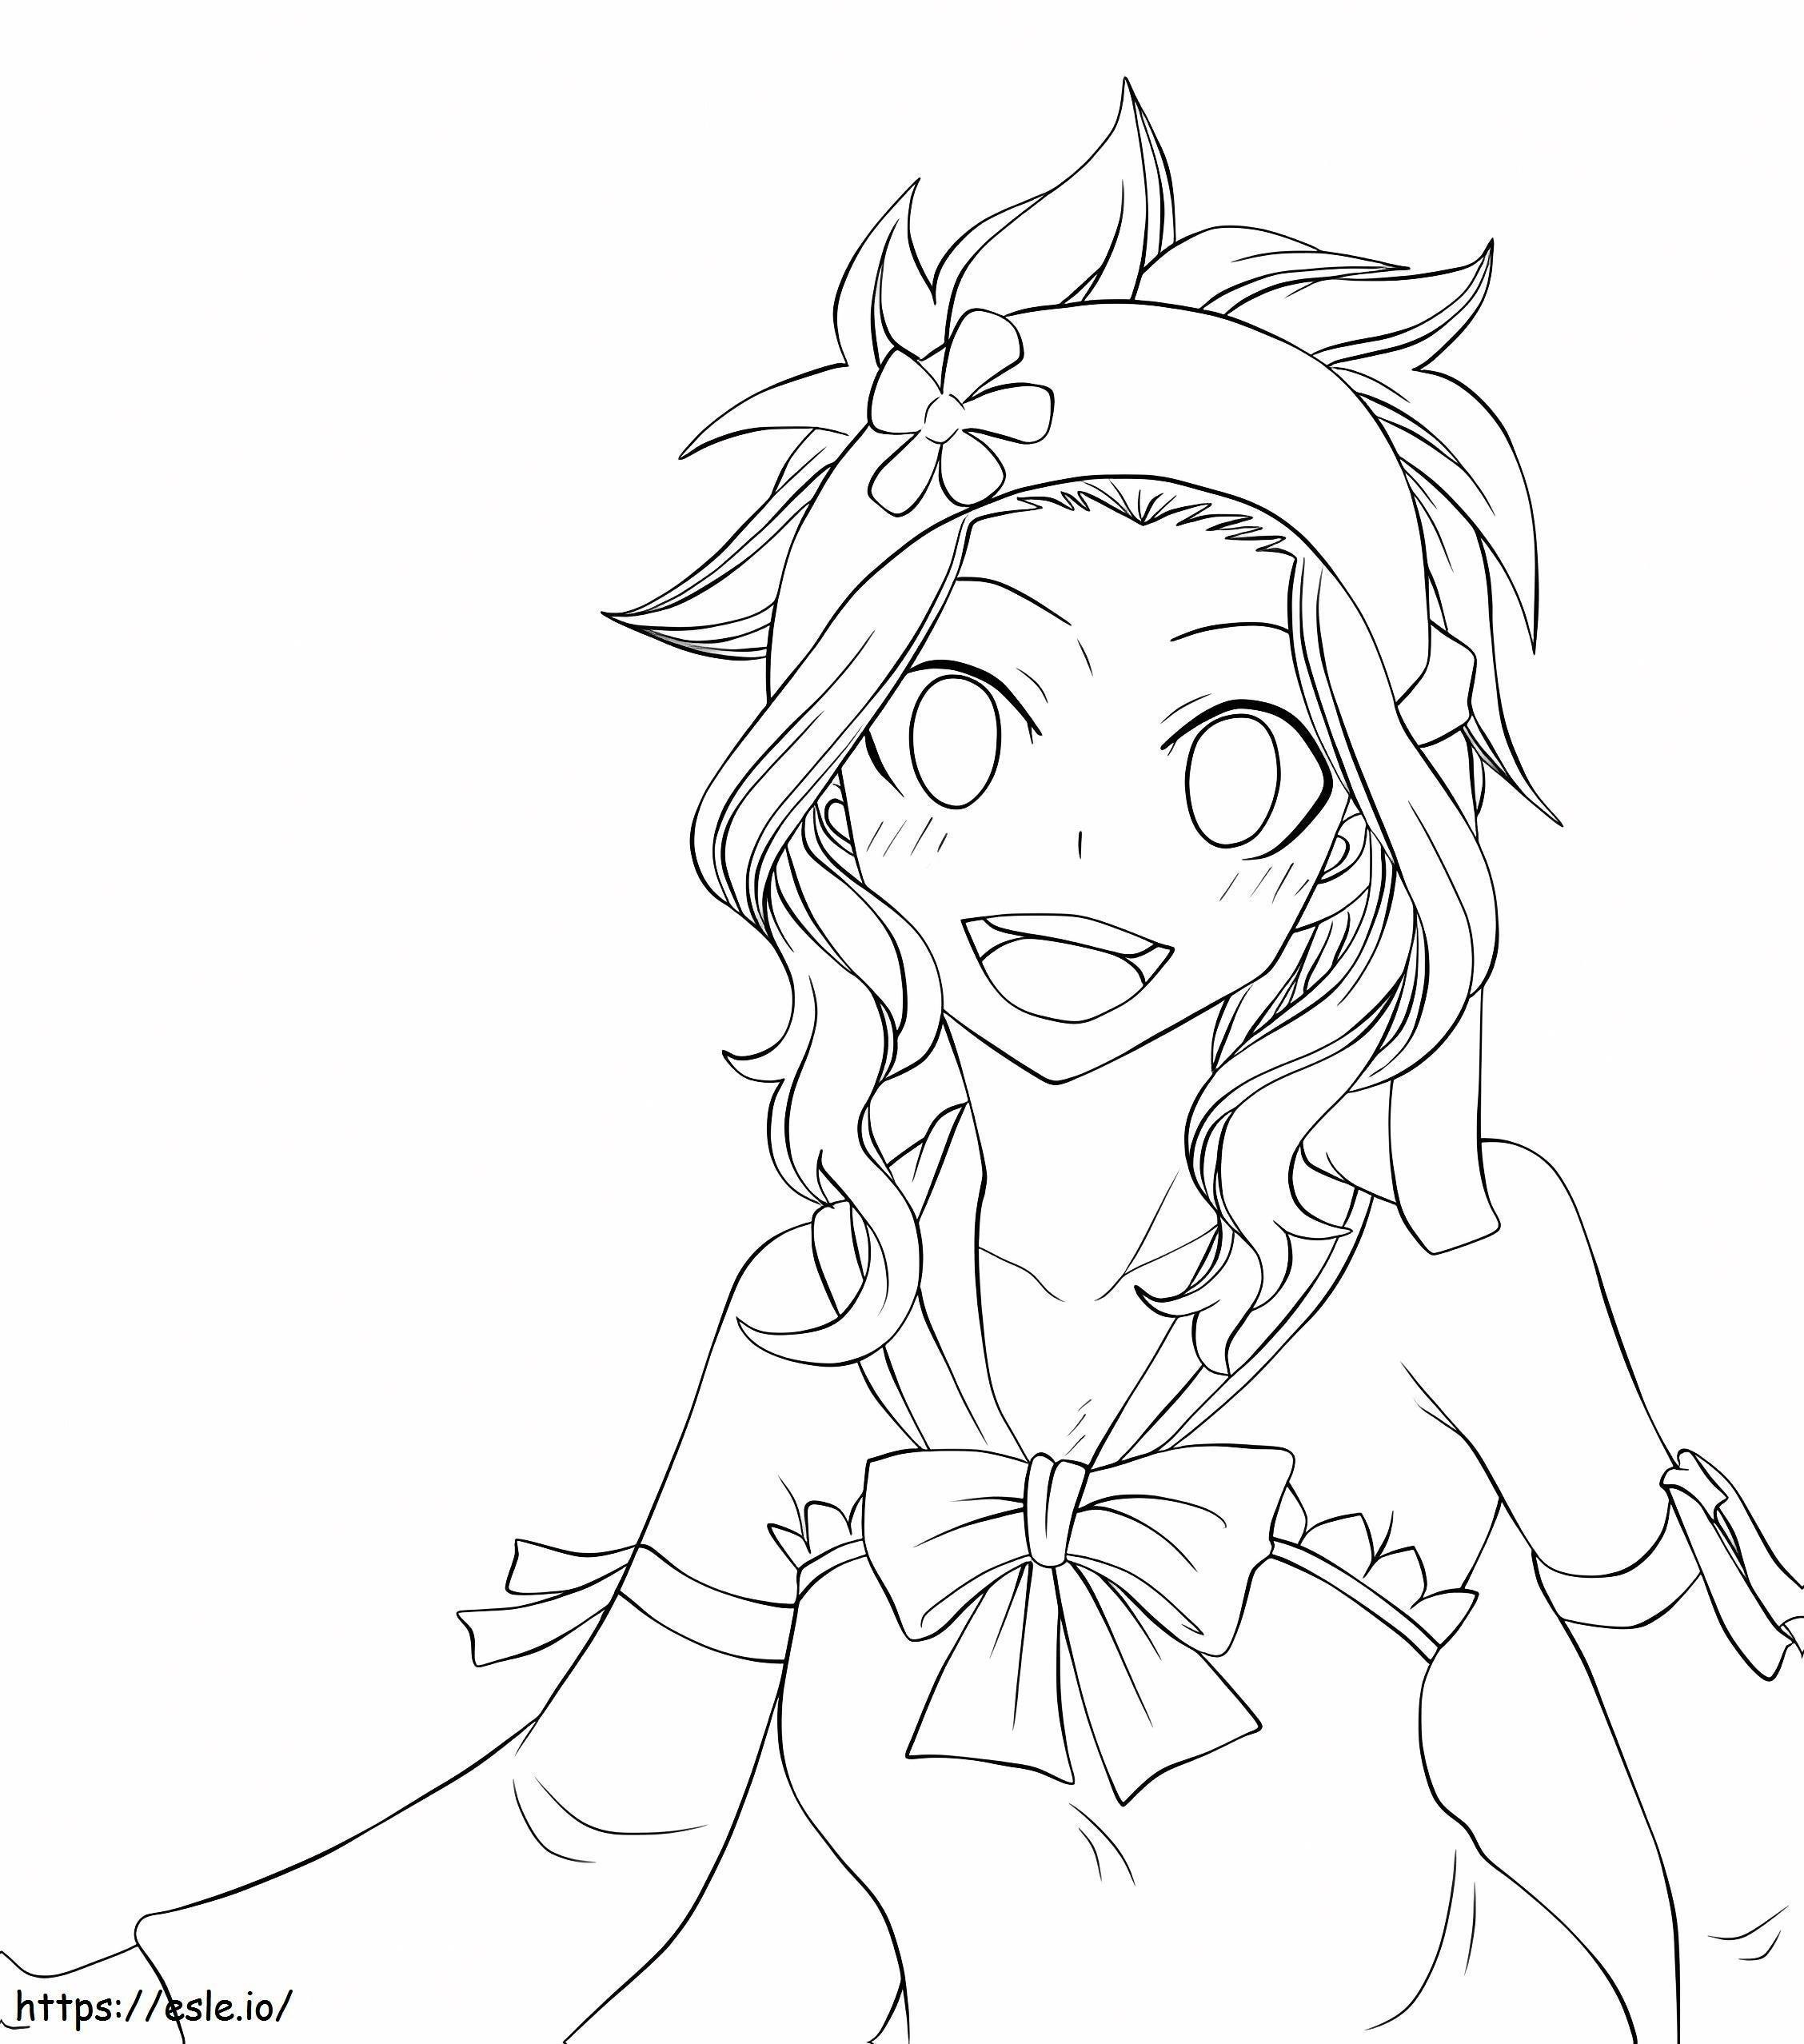 24Levy Smiling coloring page